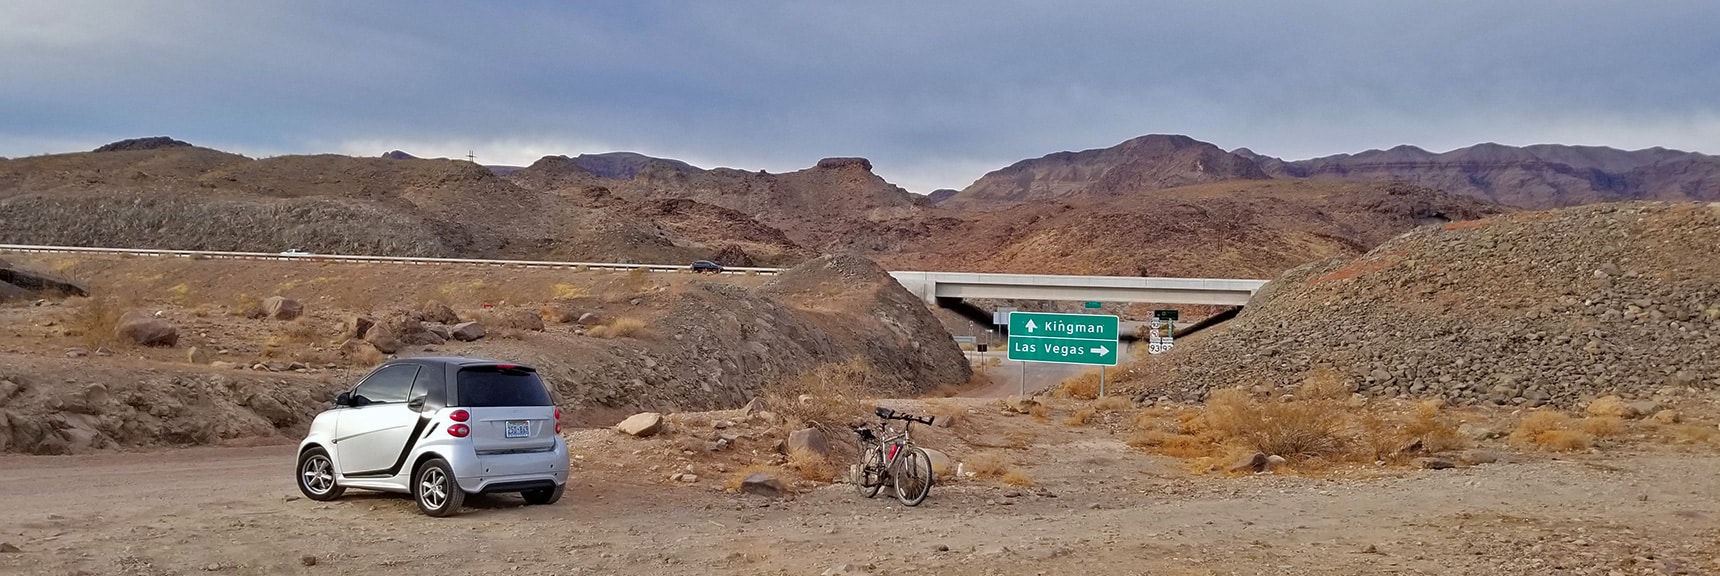 The Adventure Begins at Hwy 93 & Kingman Wash Rd | Fortification Hill | Lake Mead National Recreation Area, Arizona